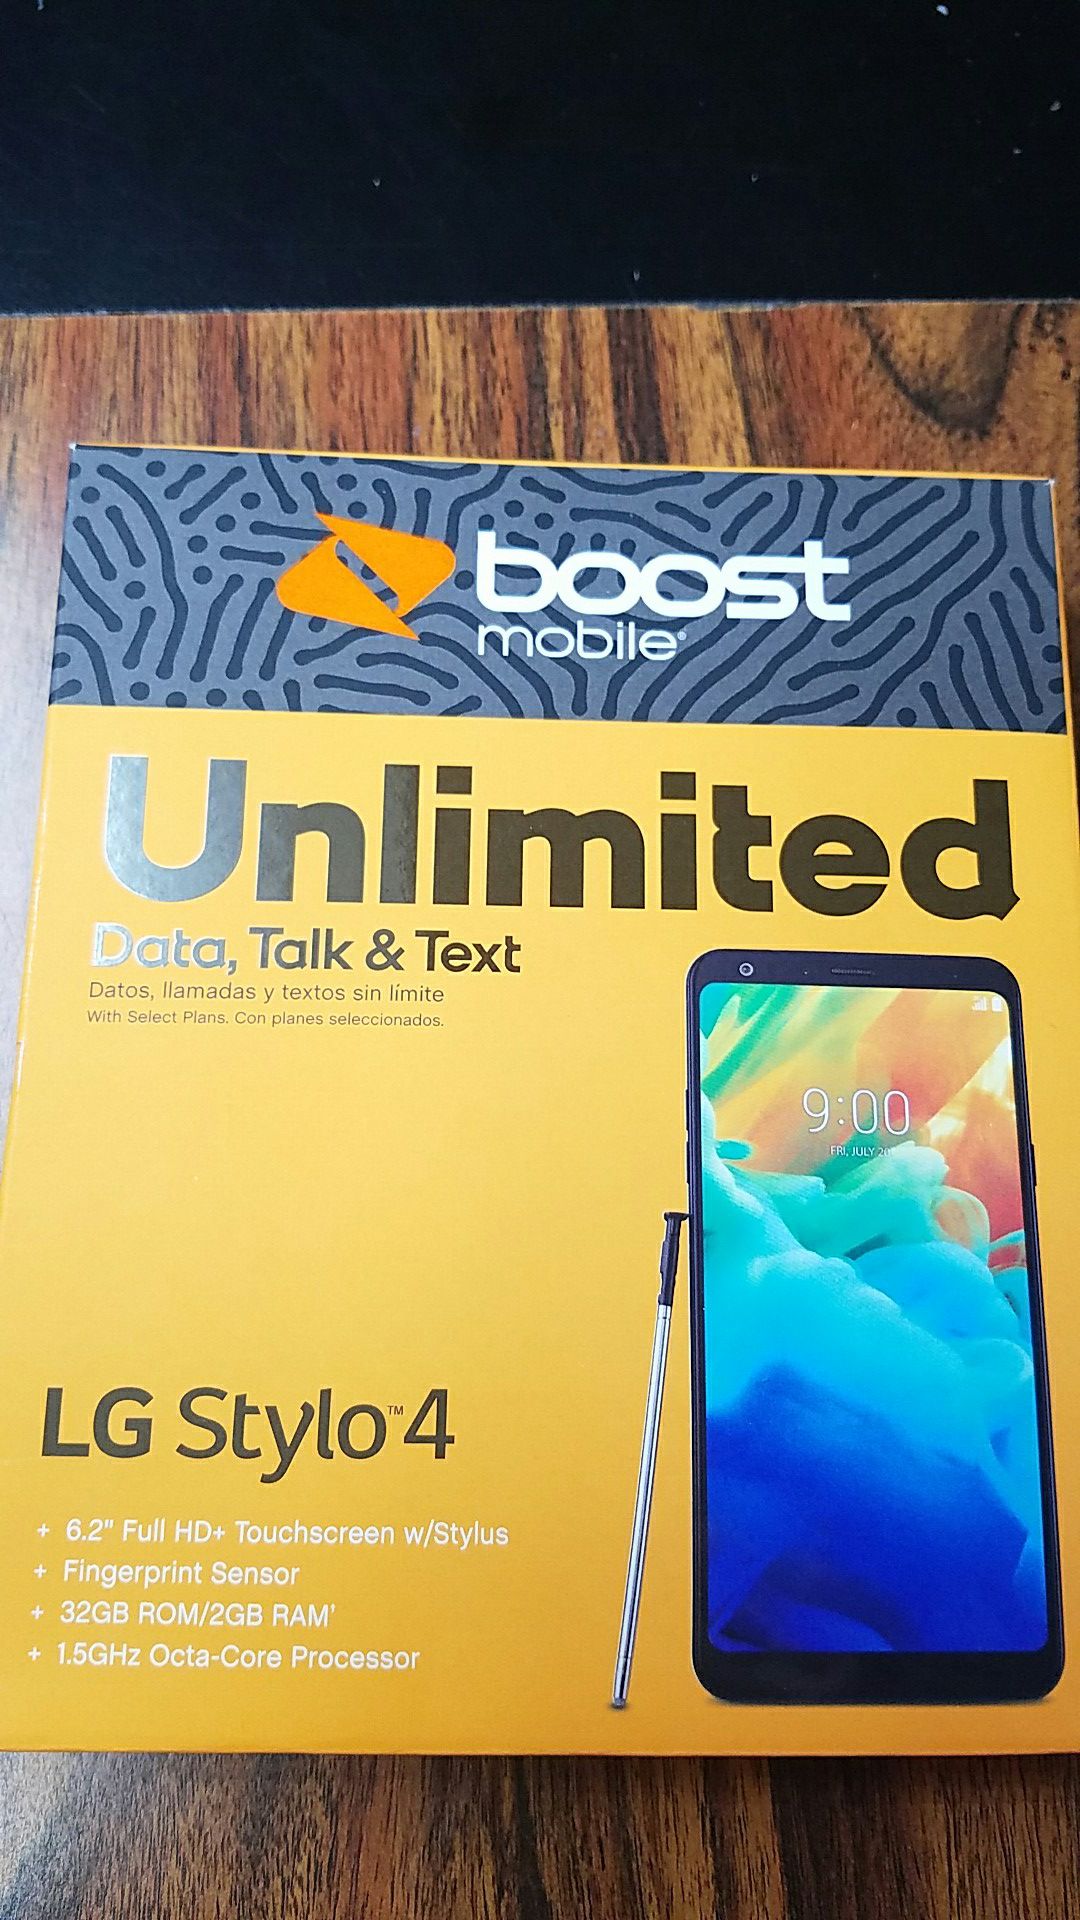 LG STYLO 4 BOOST MOBILE